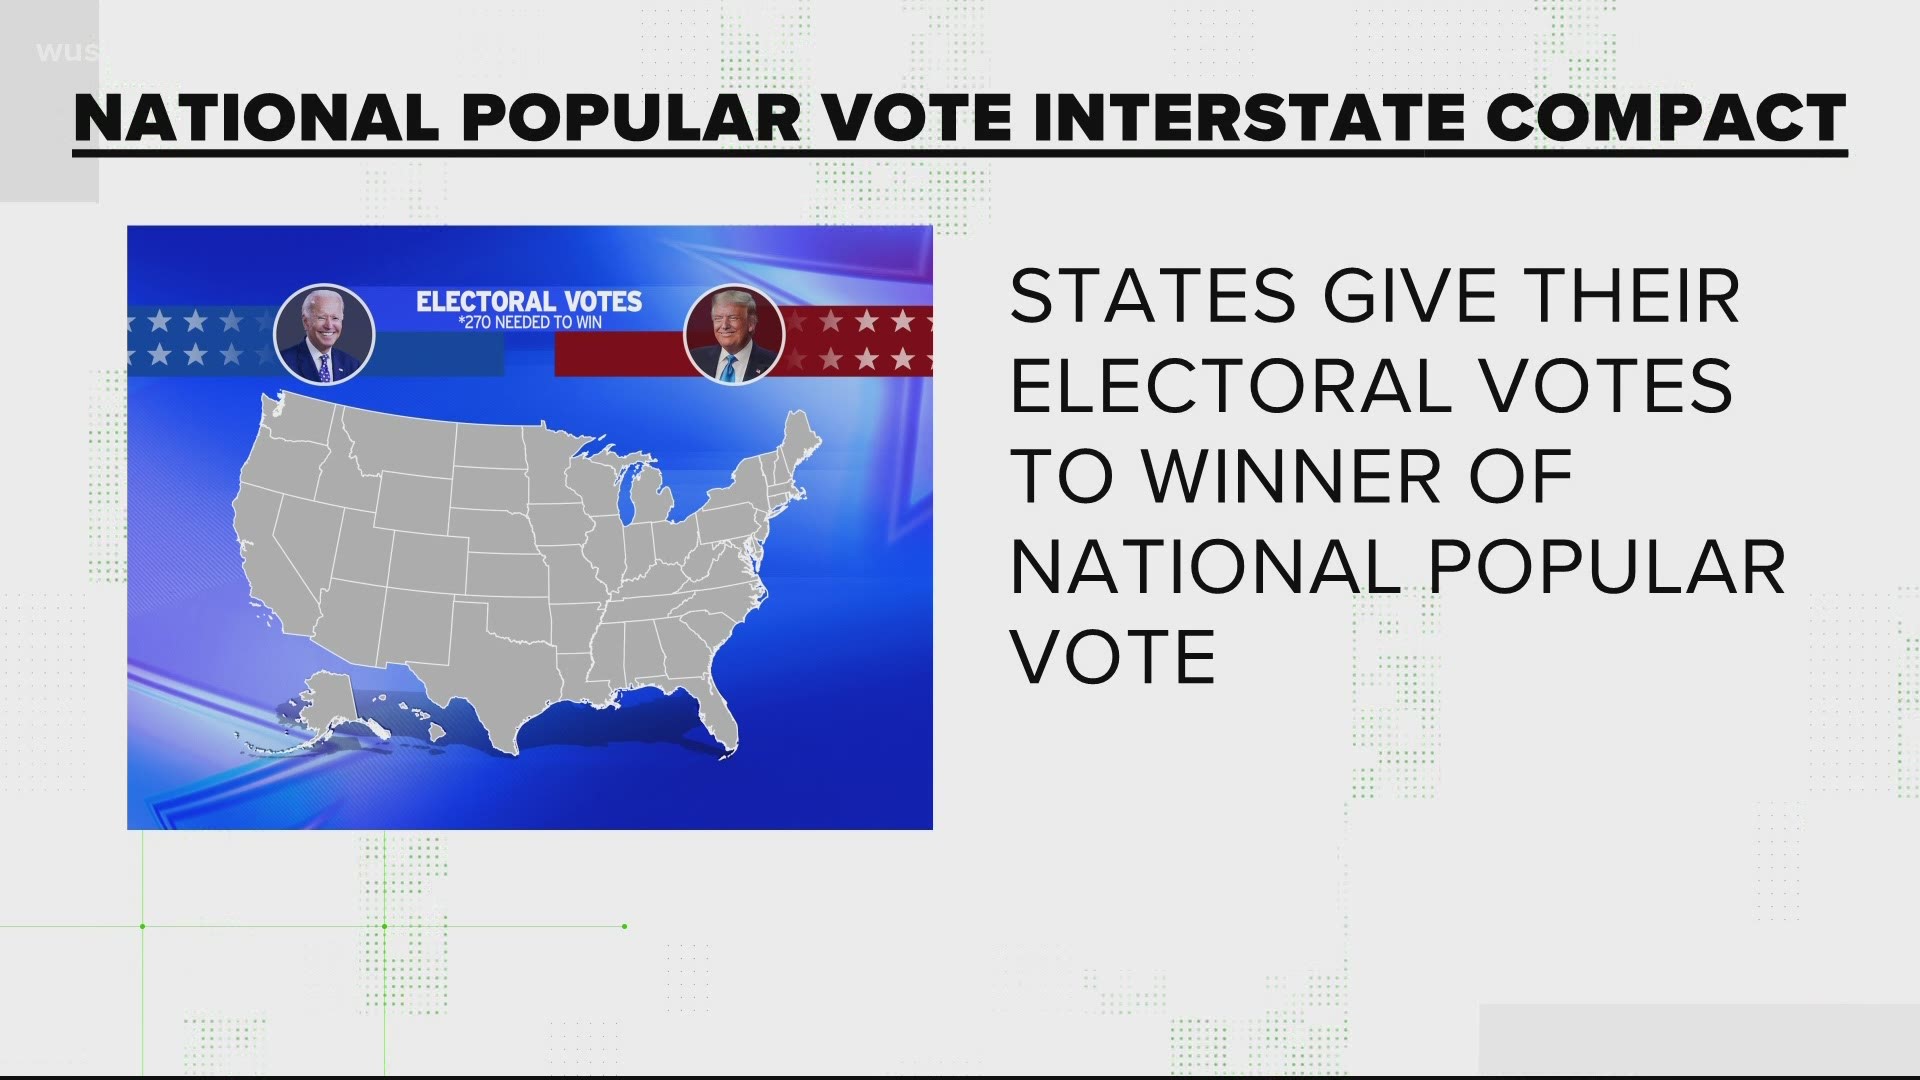 Experts say the case also opens up the possibility for states to send their Electoral Votes to the National Popular Vote winner.